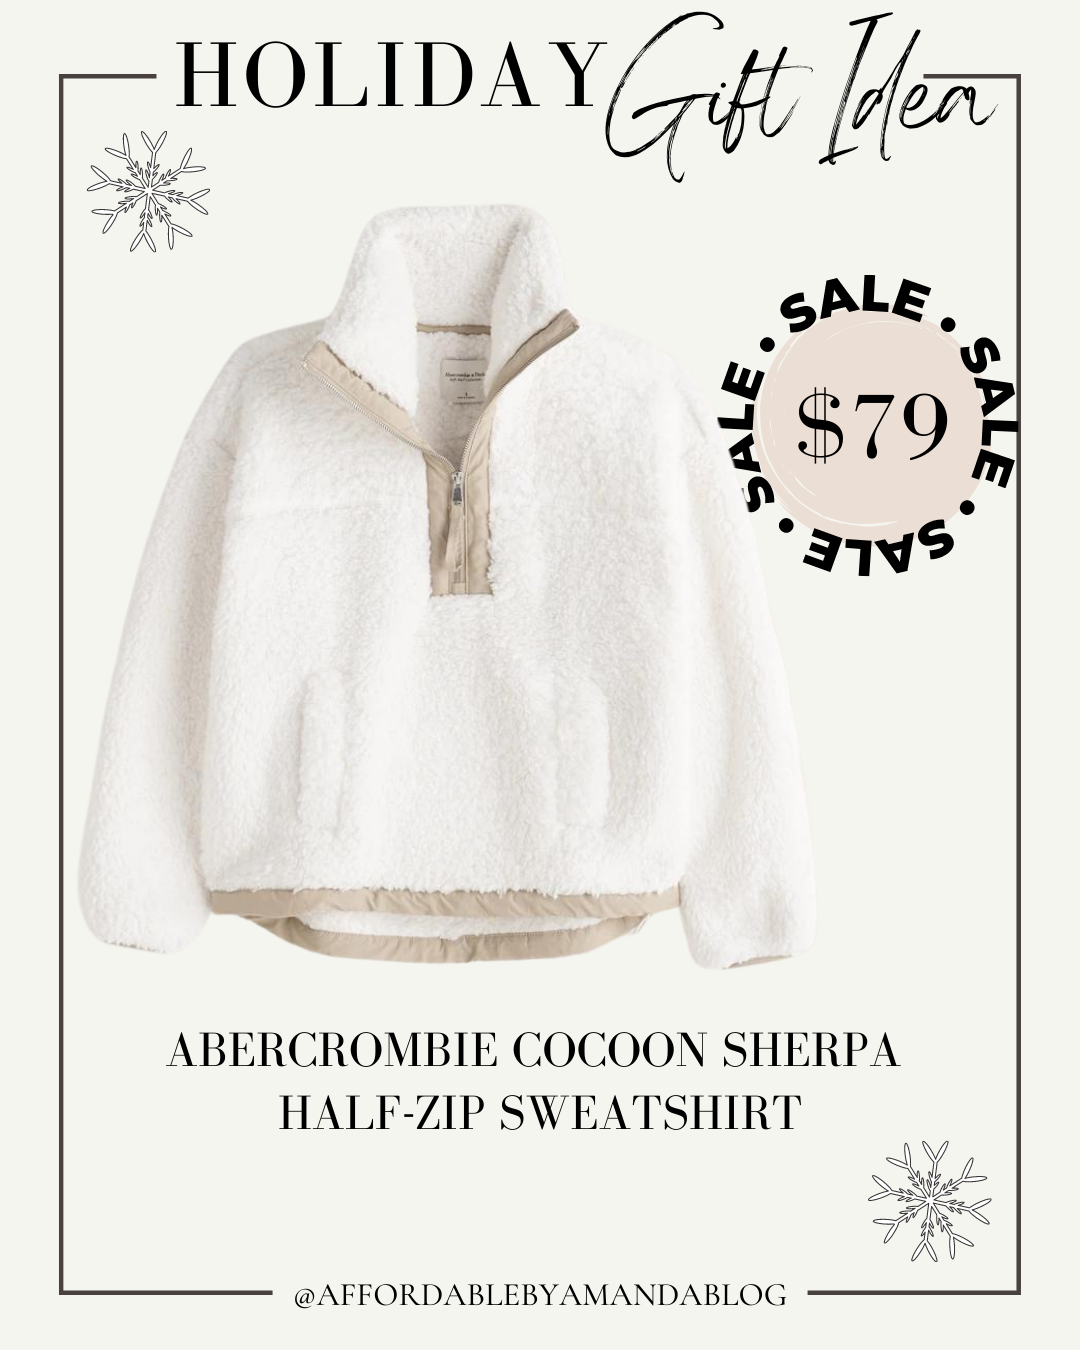 Gifts Under $100. Abercrombie & Fitch Women's Cocoon Sherpa Half-Zip Sweatshirt - Affordable by Amanda 